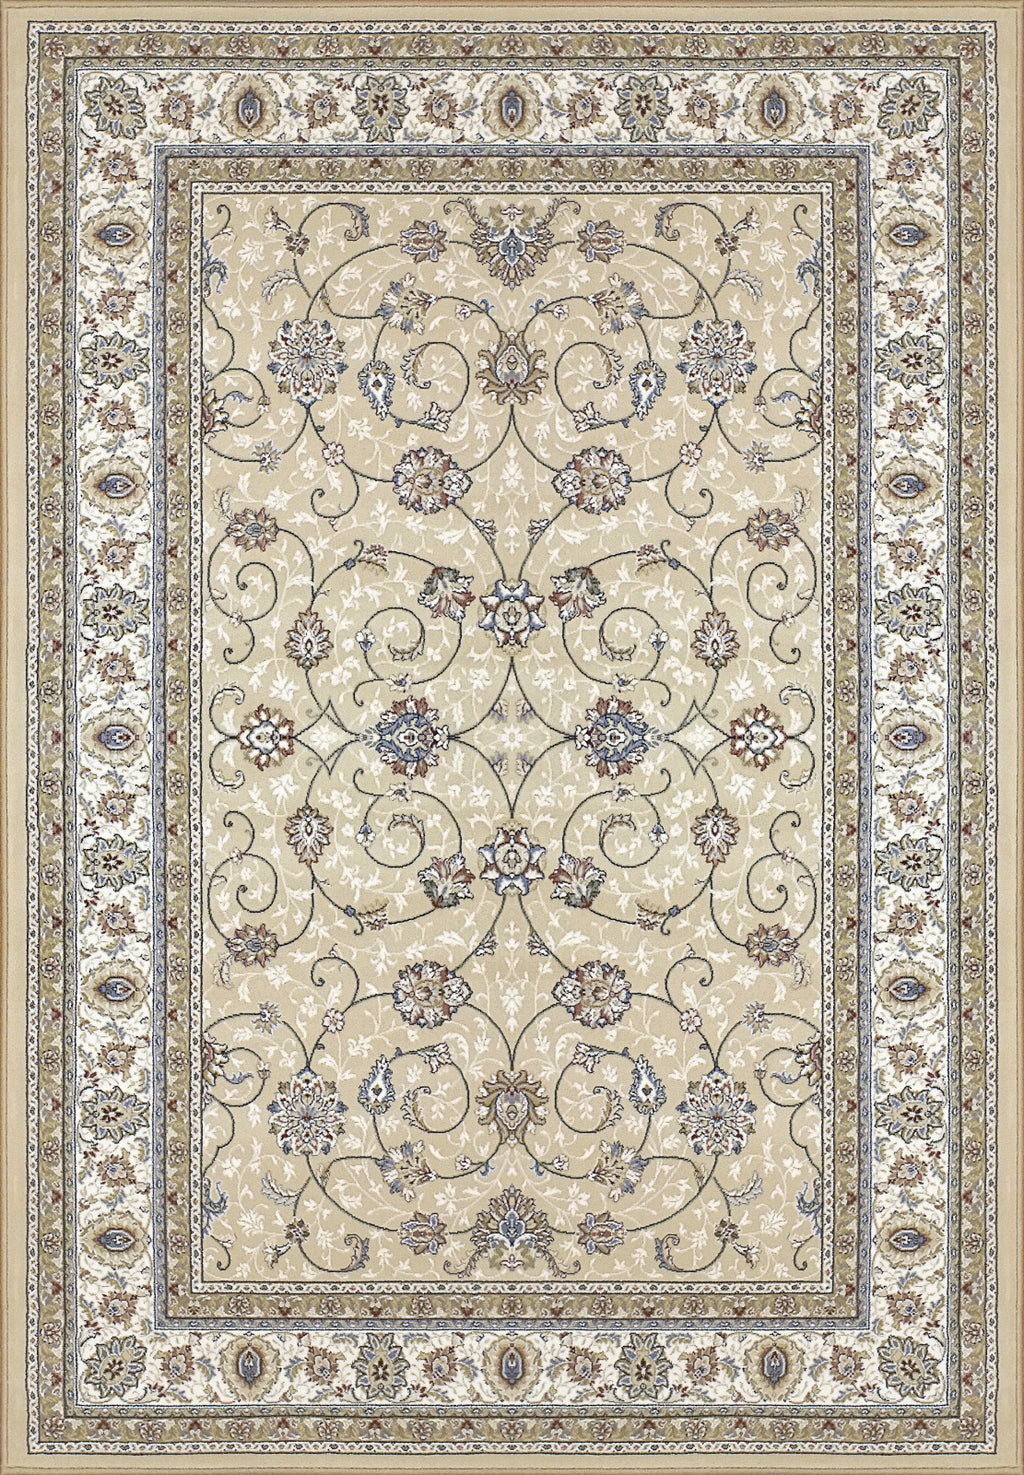 Dynamic Rugs Ancient Garden 57120 Light Gold/Ivory Area Rug main image